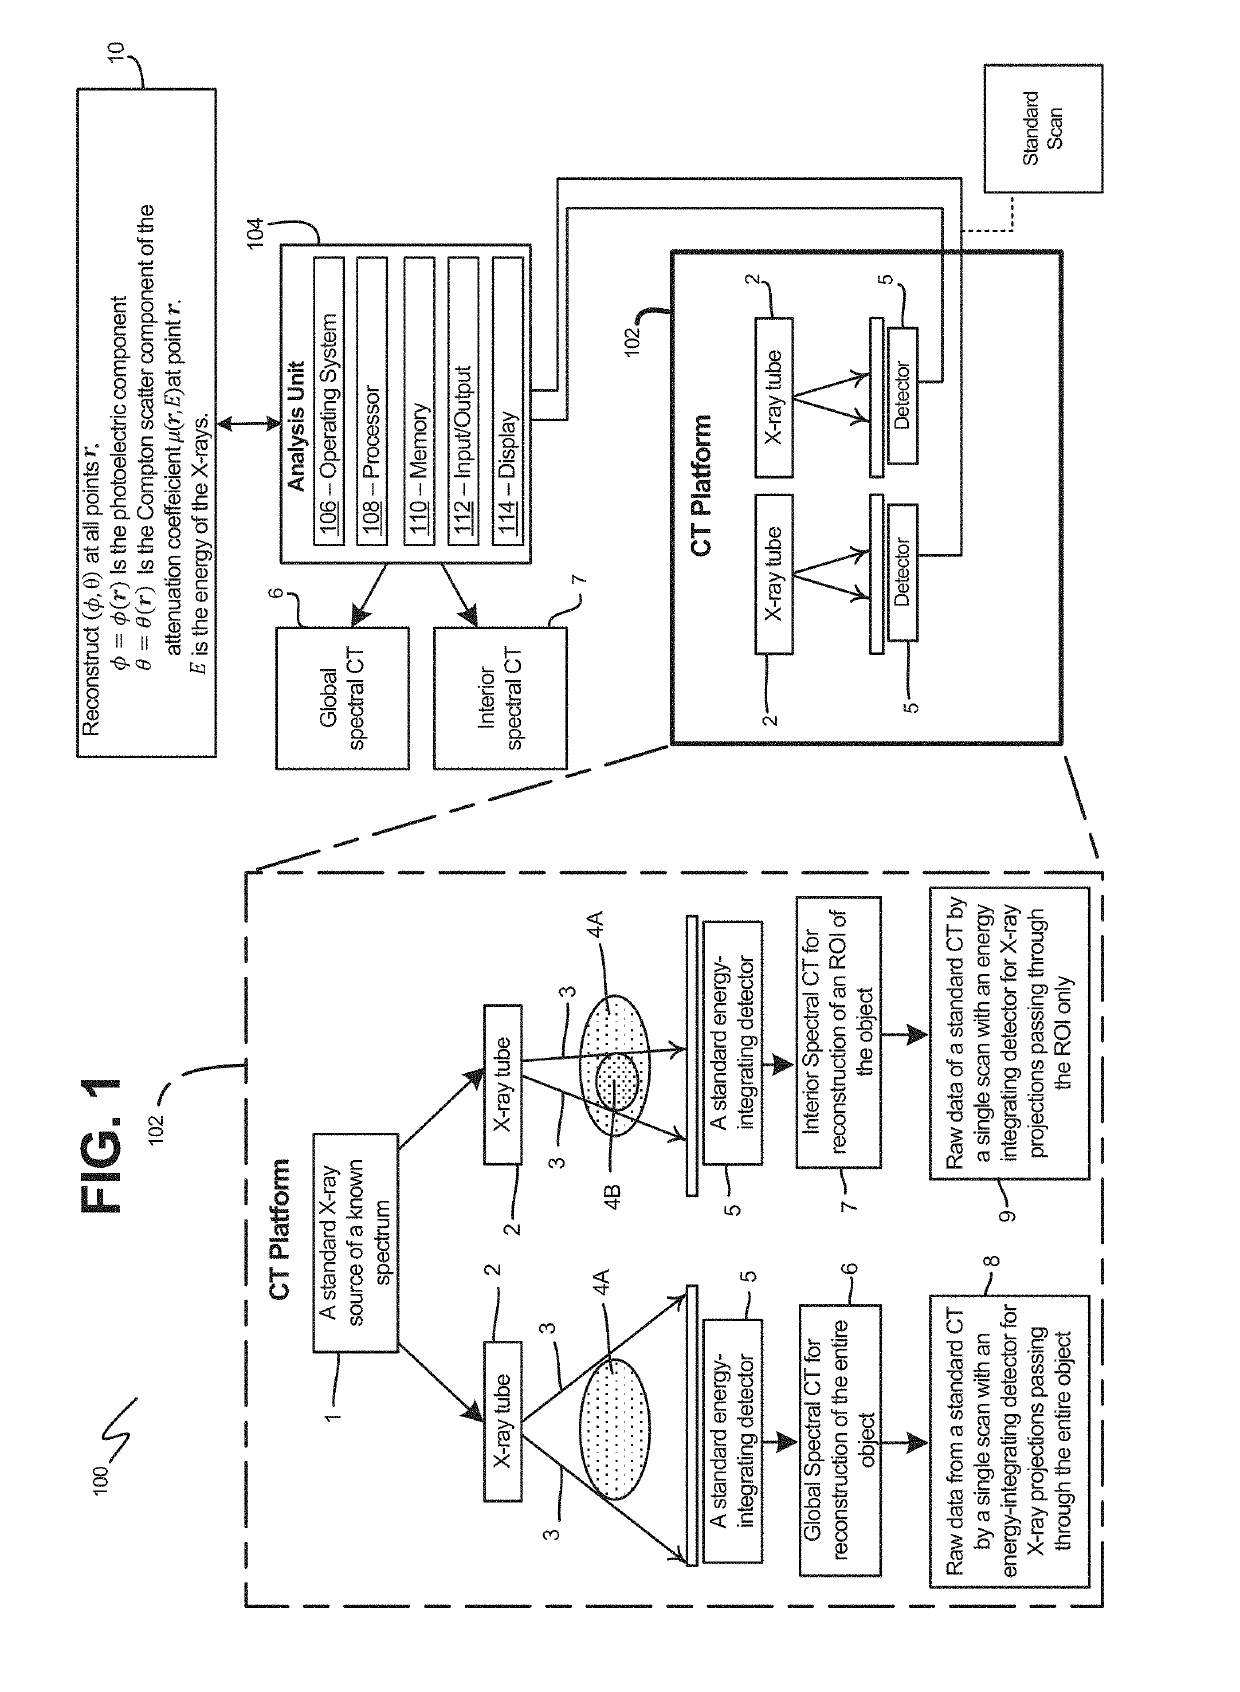 Devices, Systems and Methods Utilizing Framelet-Based Iterative Maximum-Likelihood Reconstruction Algorithms in Spectral CT